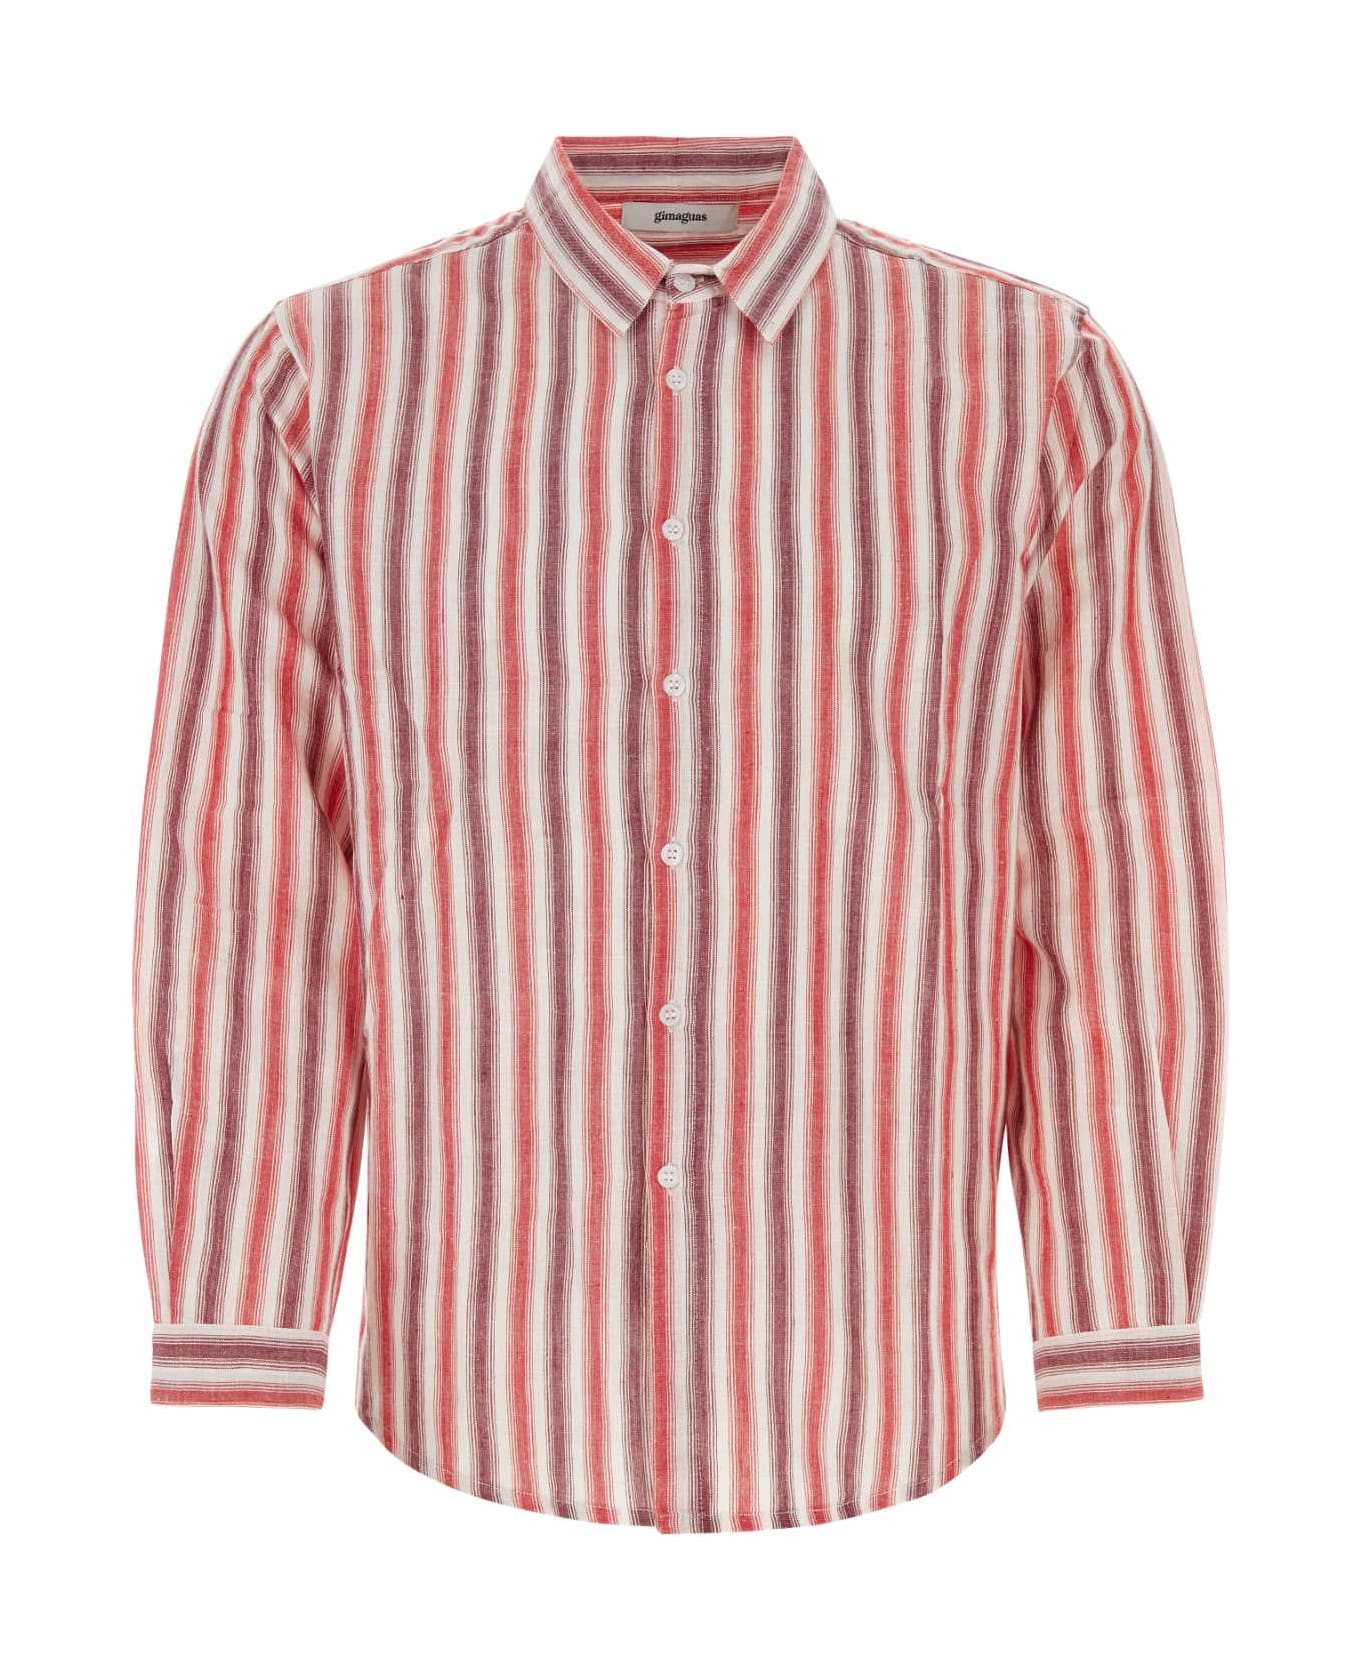 Gimaguas Embroidered Cotton Adrien Shirt - RED